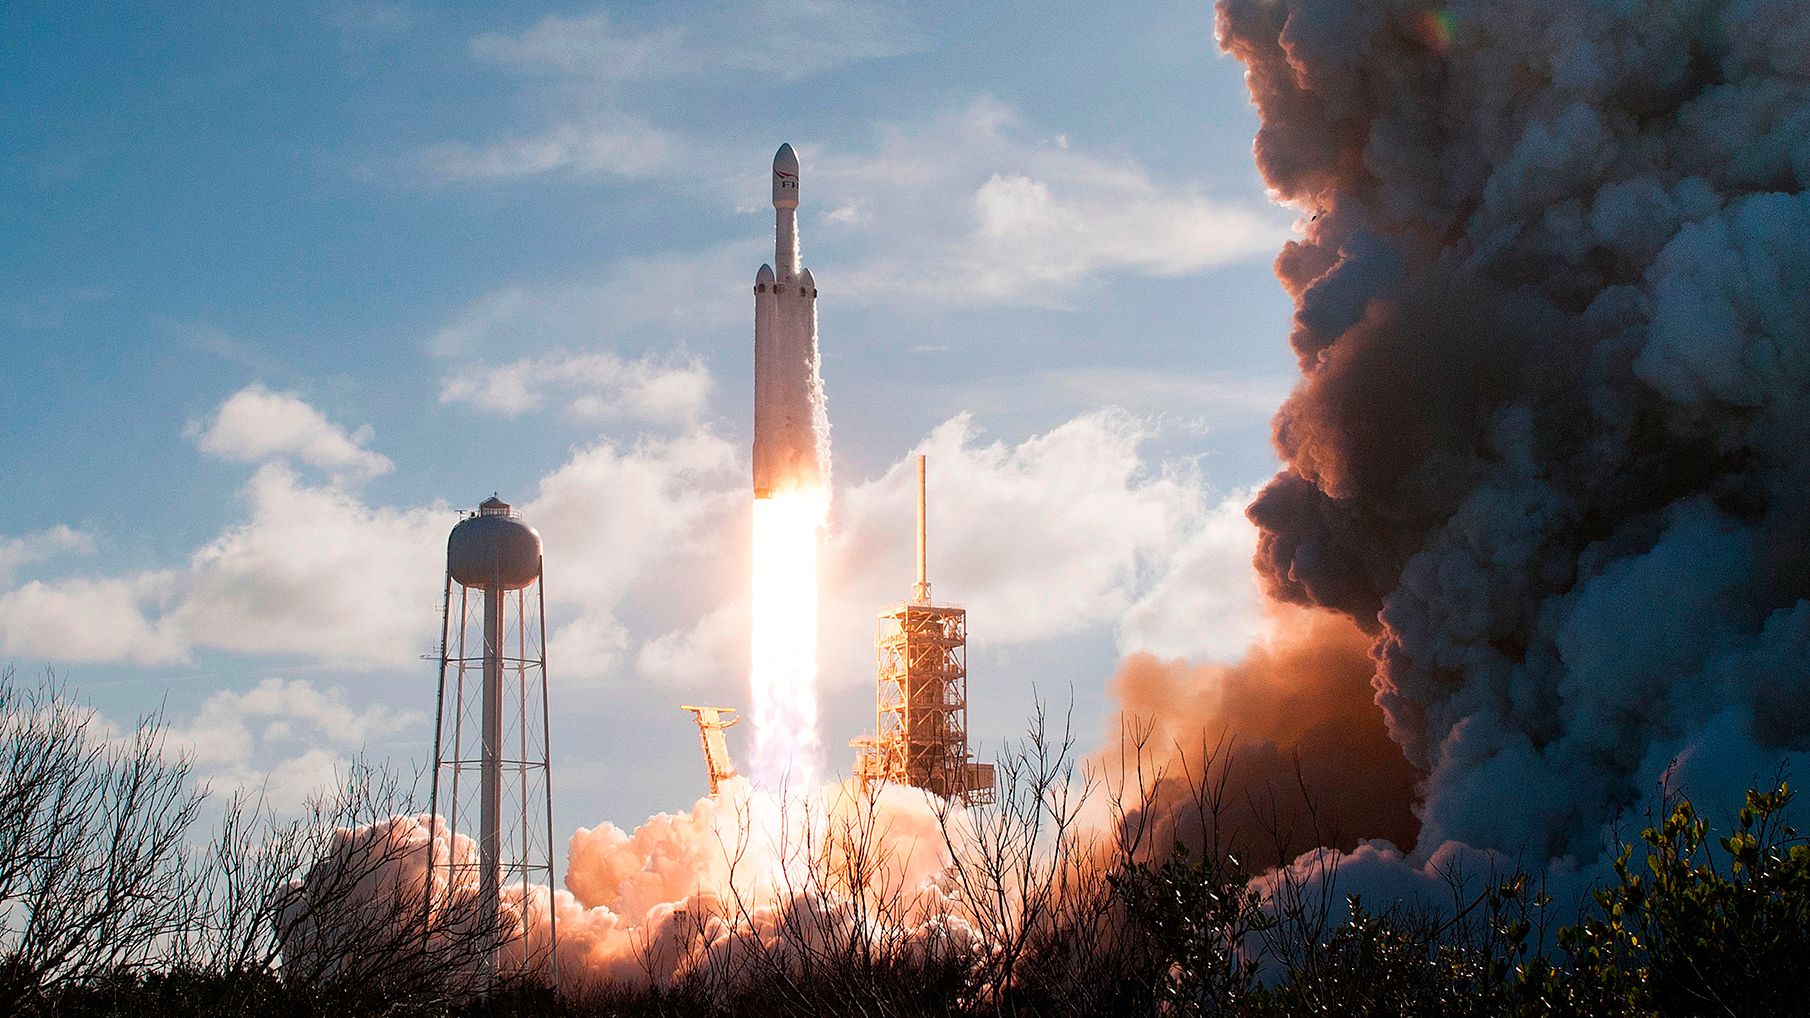 scheiden Wolkenkrabber stormloop SpaceX's Falcon Heavy rocket launches first paid mission and lands all  three boosters | CNN Business